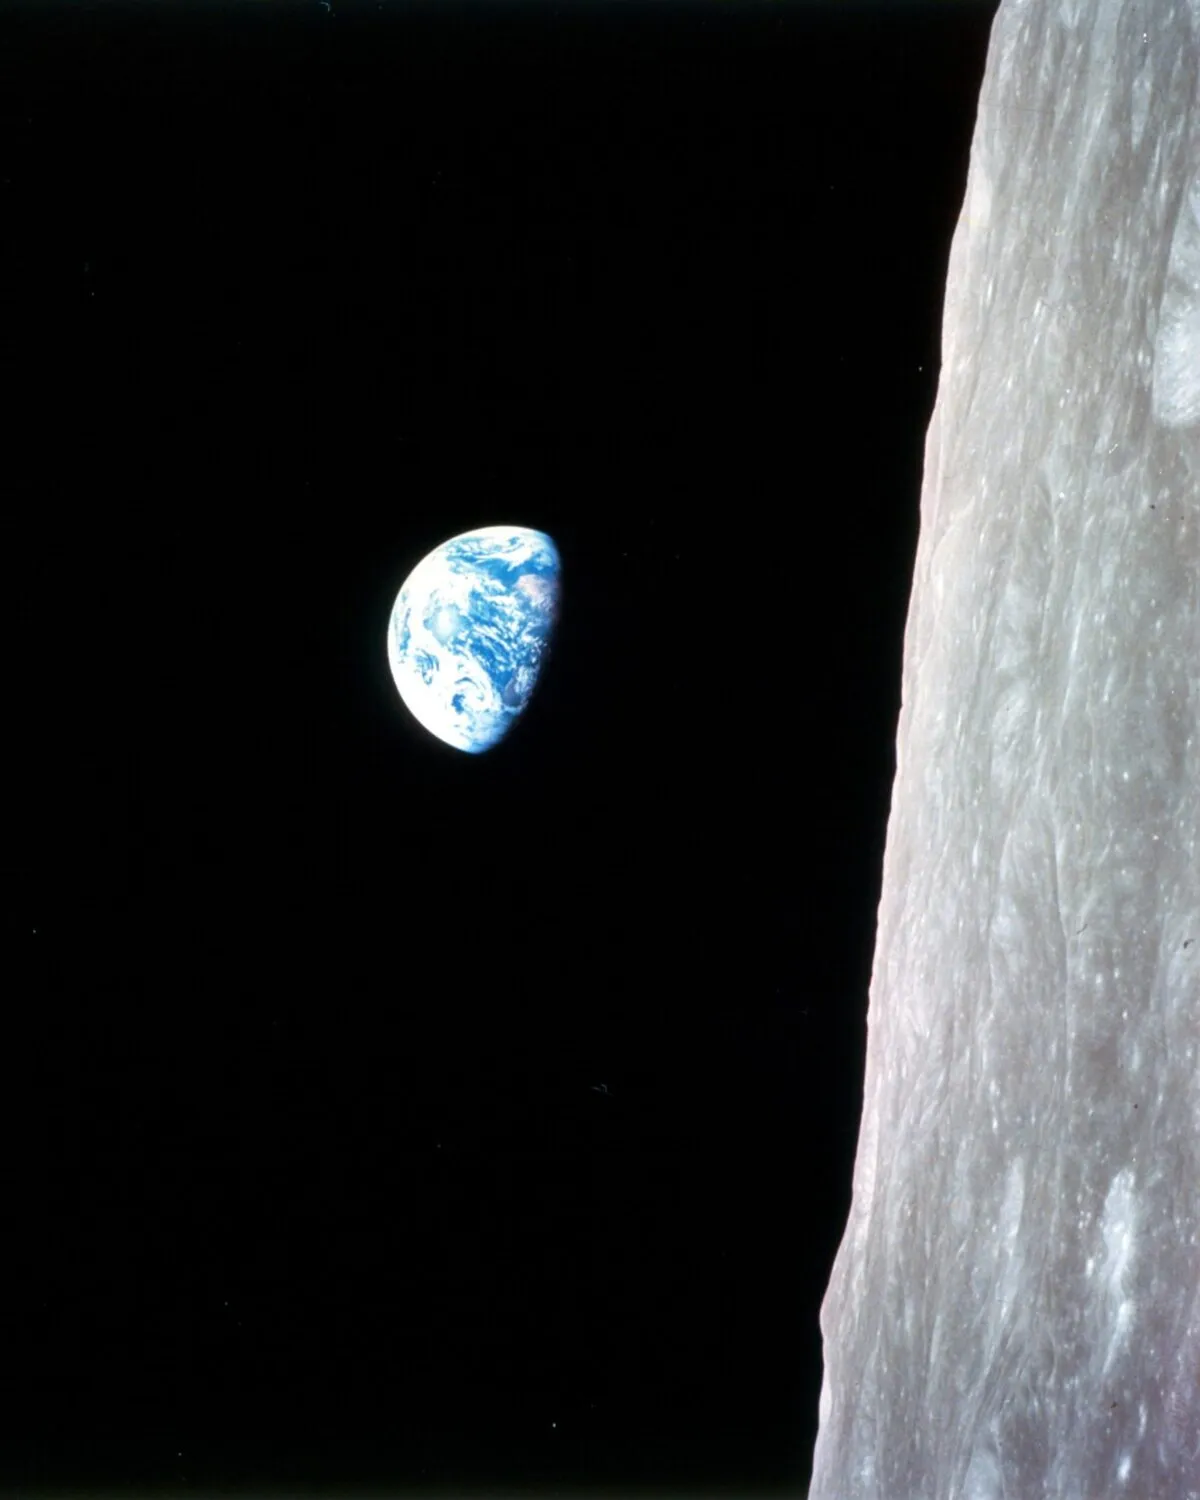 A view of the rising Earth as seen by the Apollo 8 astronauts as they emerged from the far side of the Moon. Credit: NASA